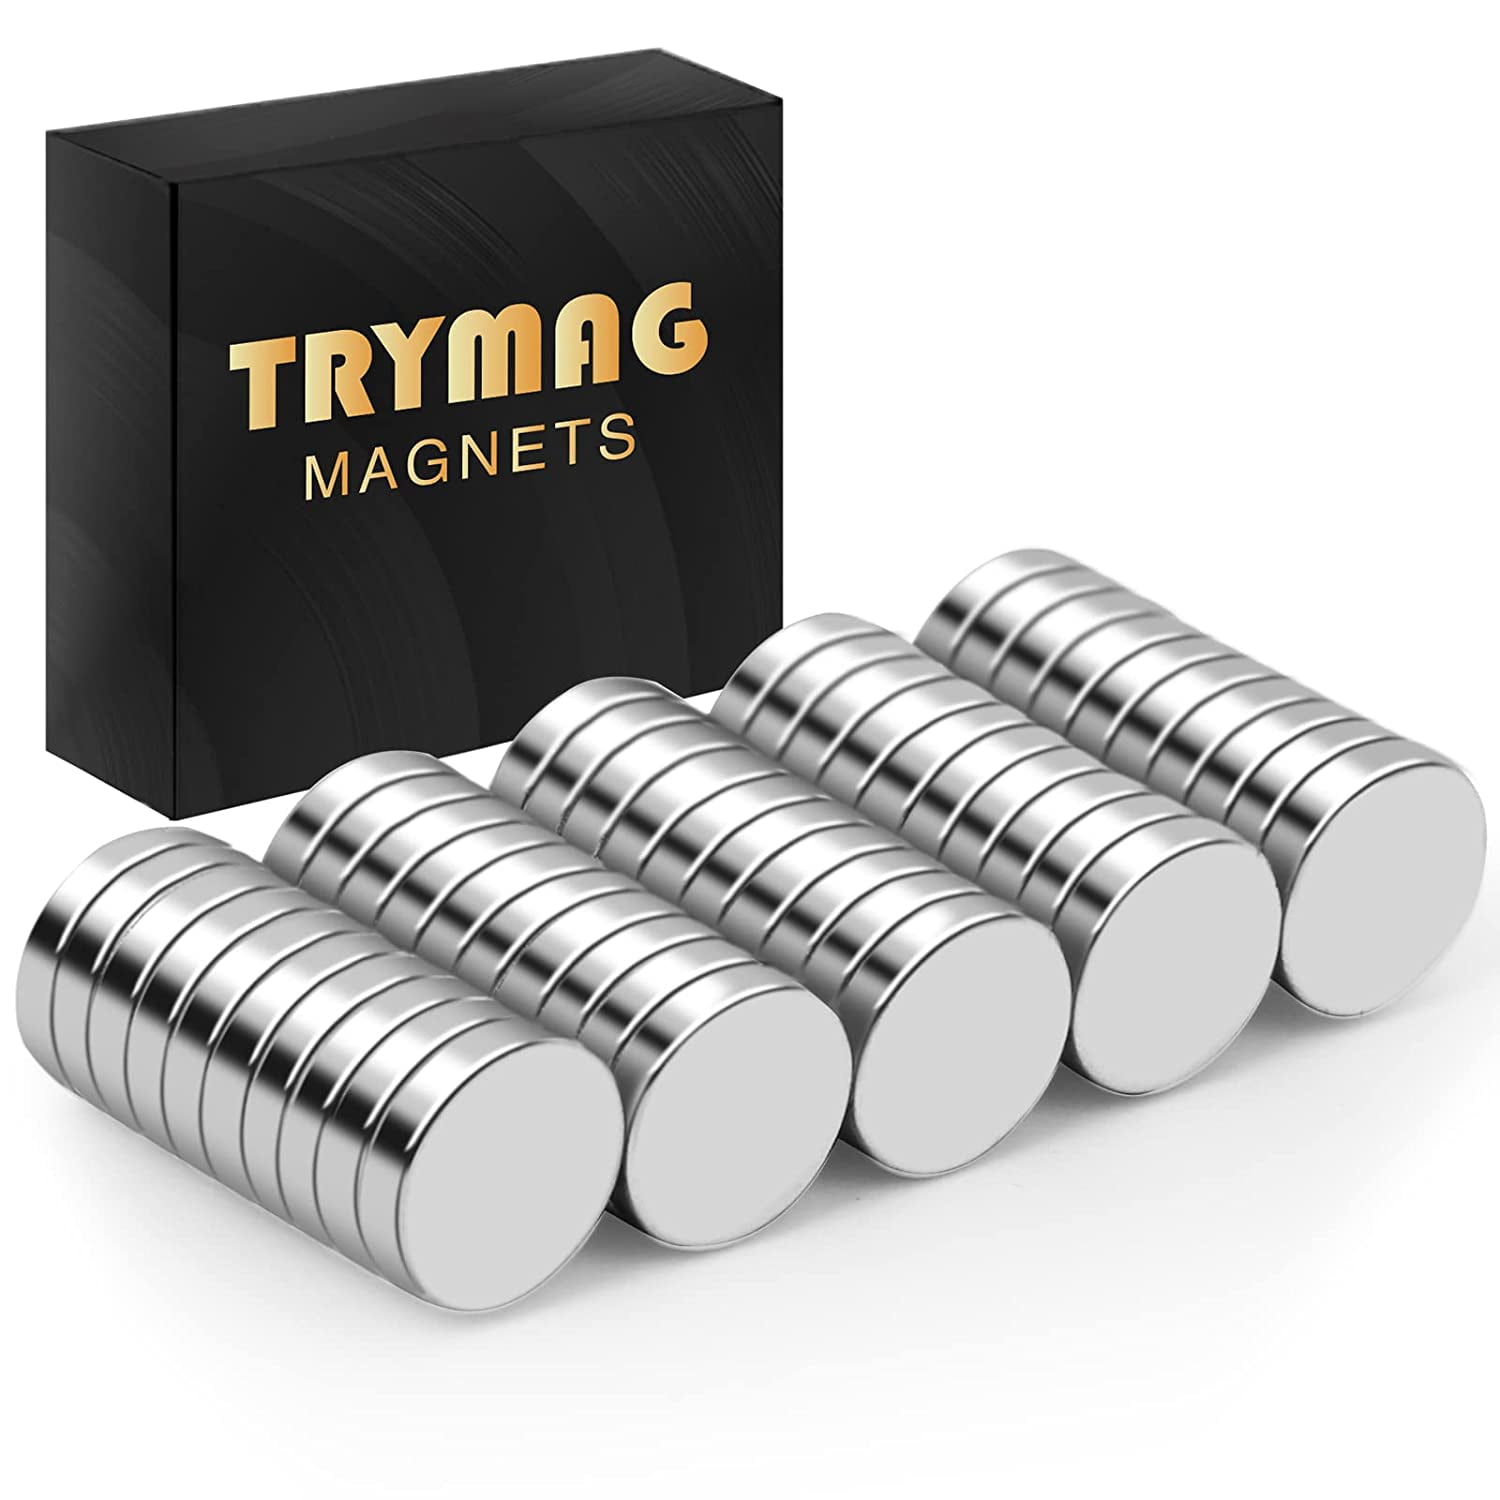 Magnets 50Pcs, Small Round Rare Earth Magnets, Strong Neodymium Disc Magnets for Whiteboard, Fridge, Office, Hobbies, Crafts and Erase Board - Walmart.com